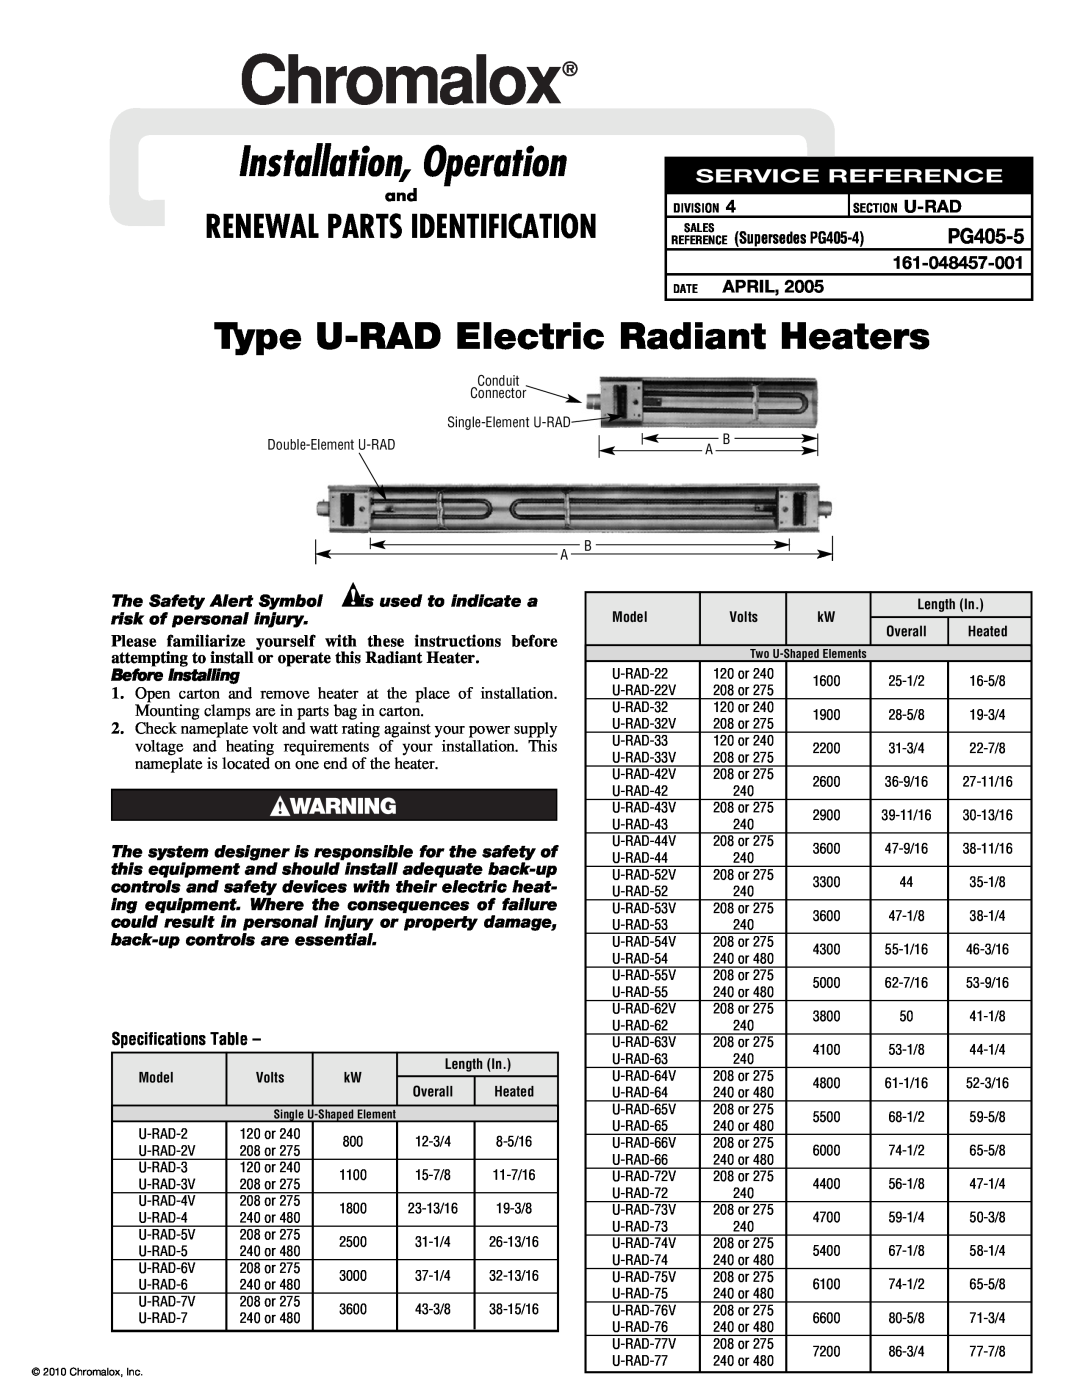 Chromalox PG405-5 specifications Specifications Table, Chromalox, Installation, Operation, Renewal Parts Identification 